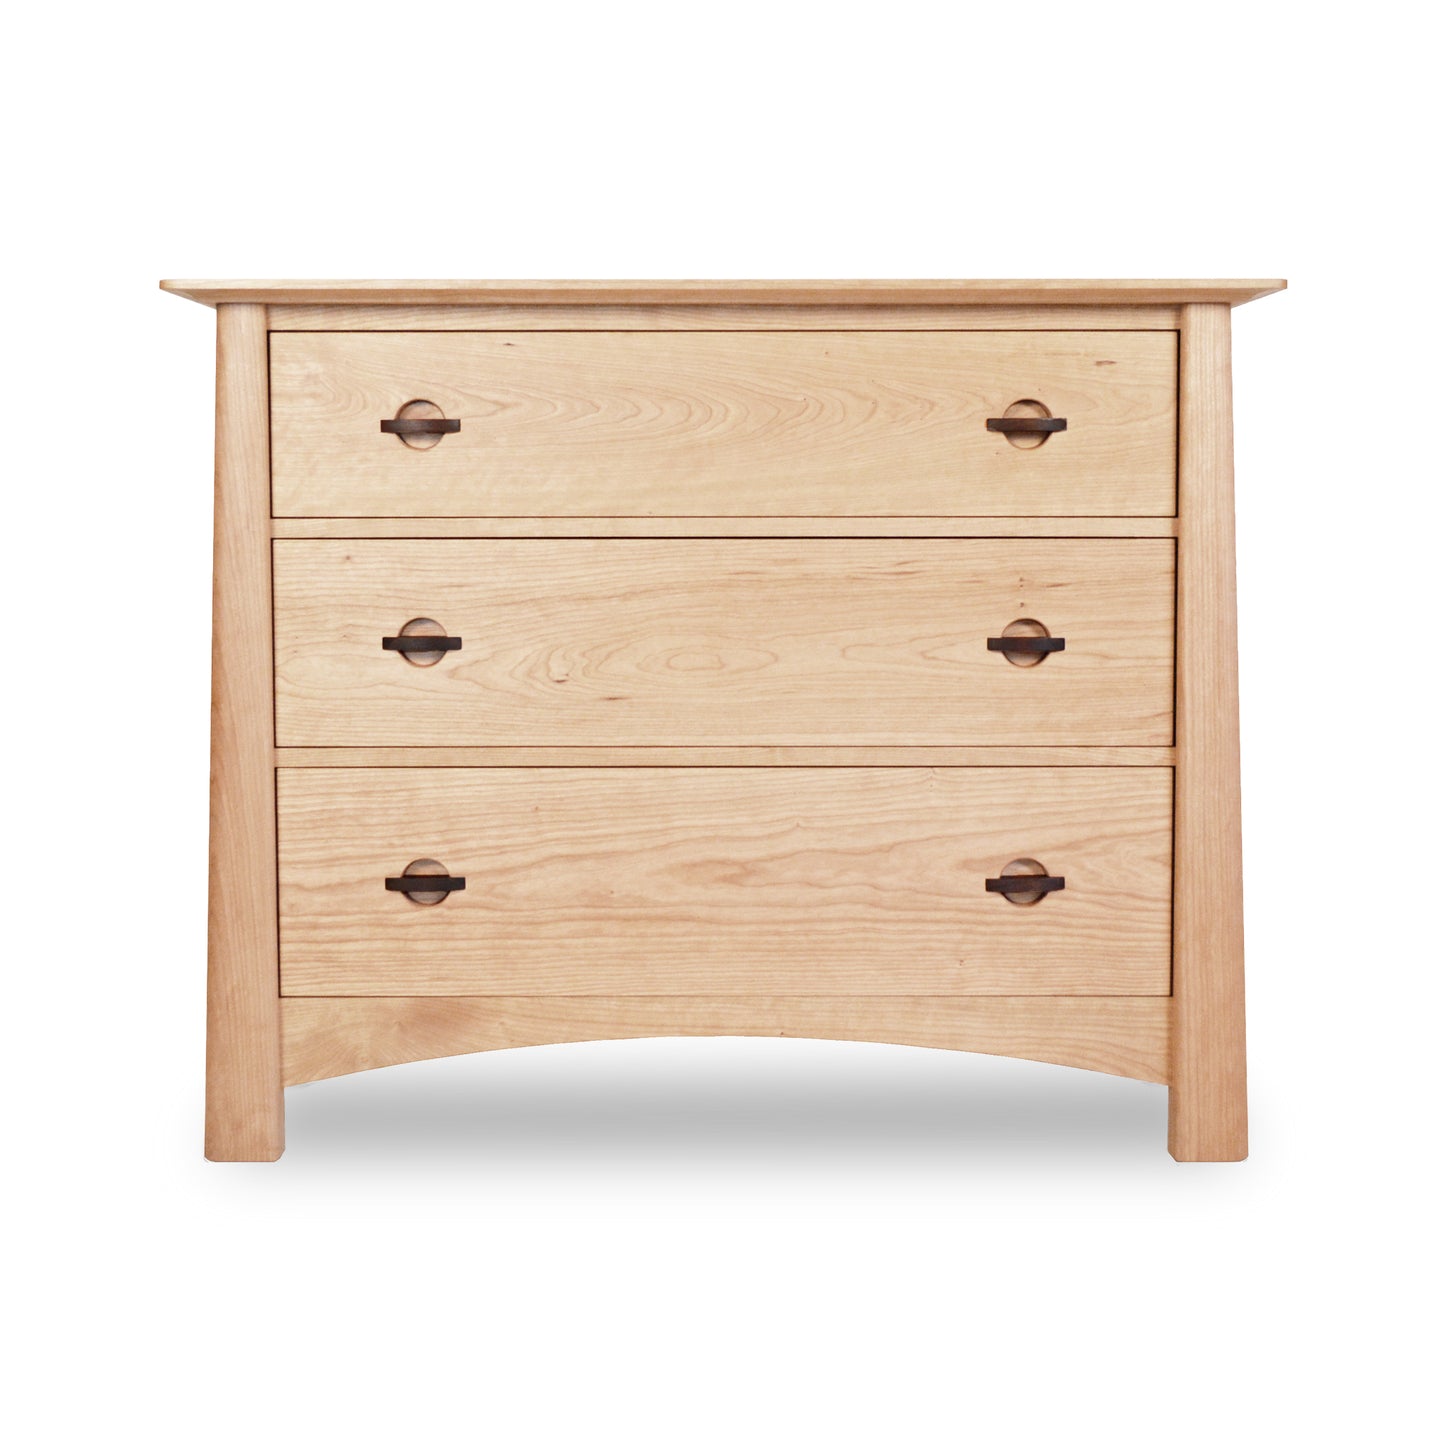 A Maple Corner Woodworks Cherry Moon 3-Drawer Chest with ample storage space, crafted with natural hardwoods, showcased against a clean white background.